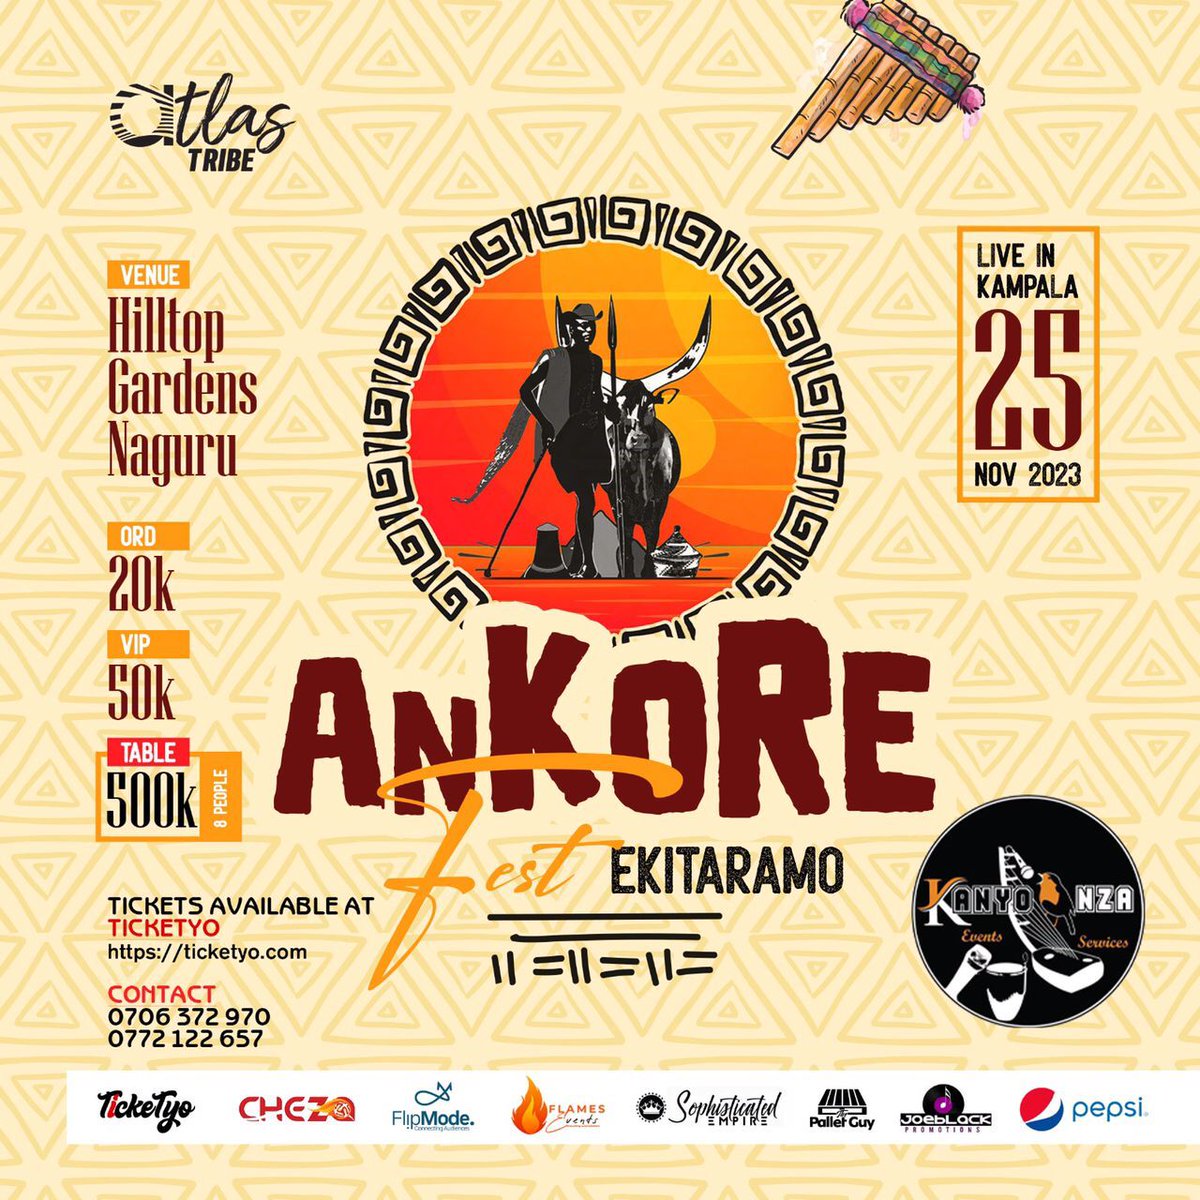 The day for Ekitaramo  /#Ankolefest is today at Hilltop Gardens Naguru let's all be there